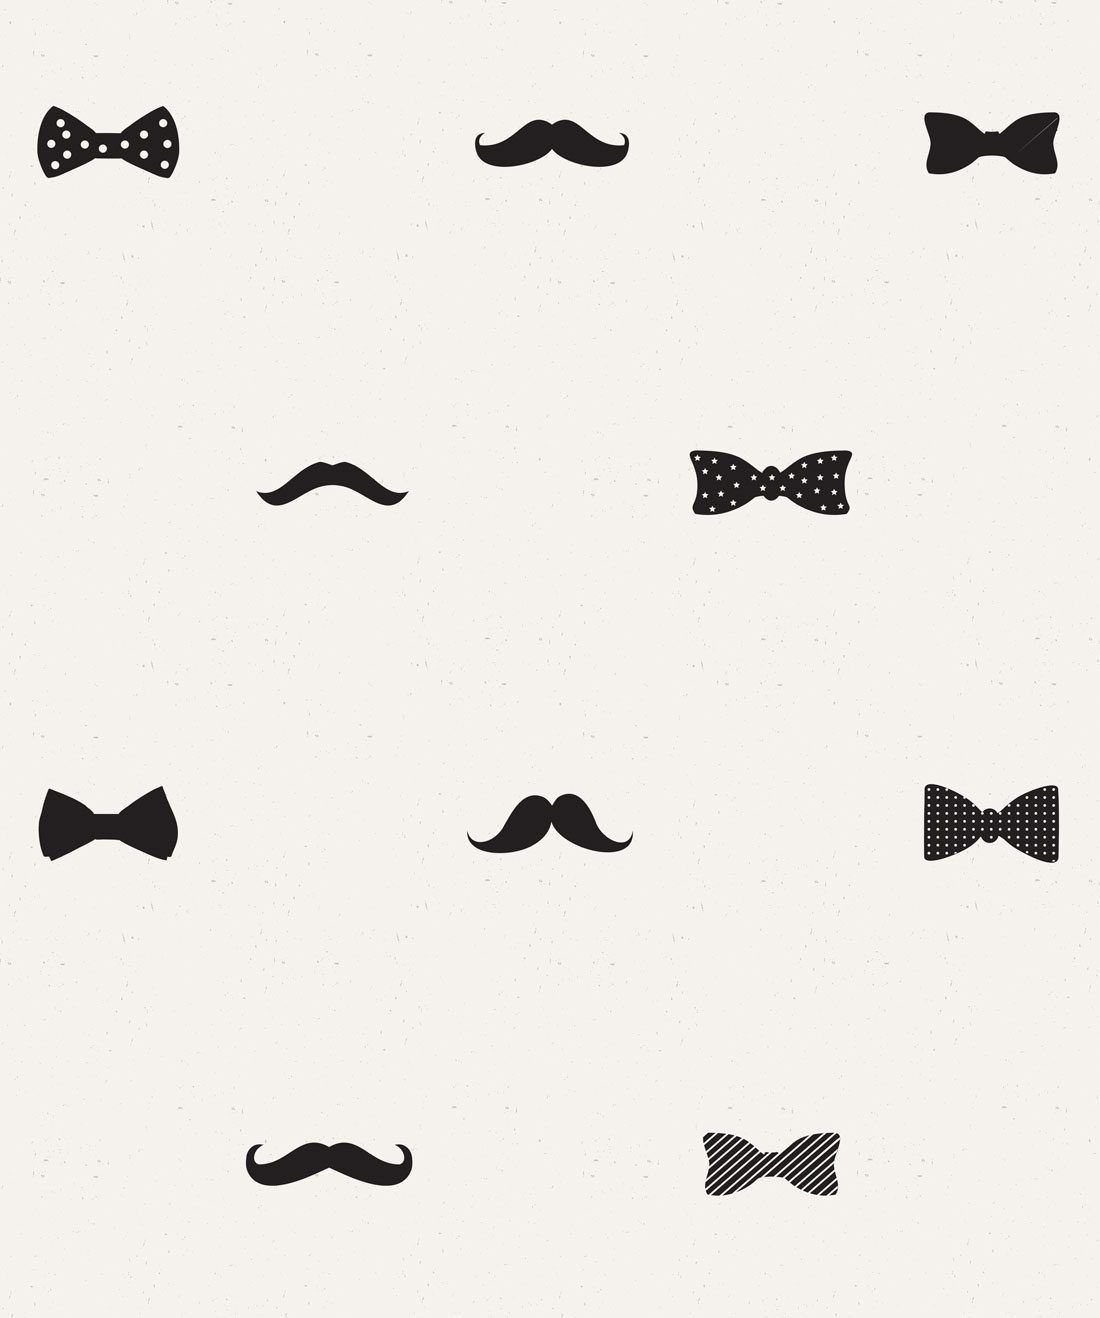 Bow- Ties and Mustaches is a hipster wallpaper